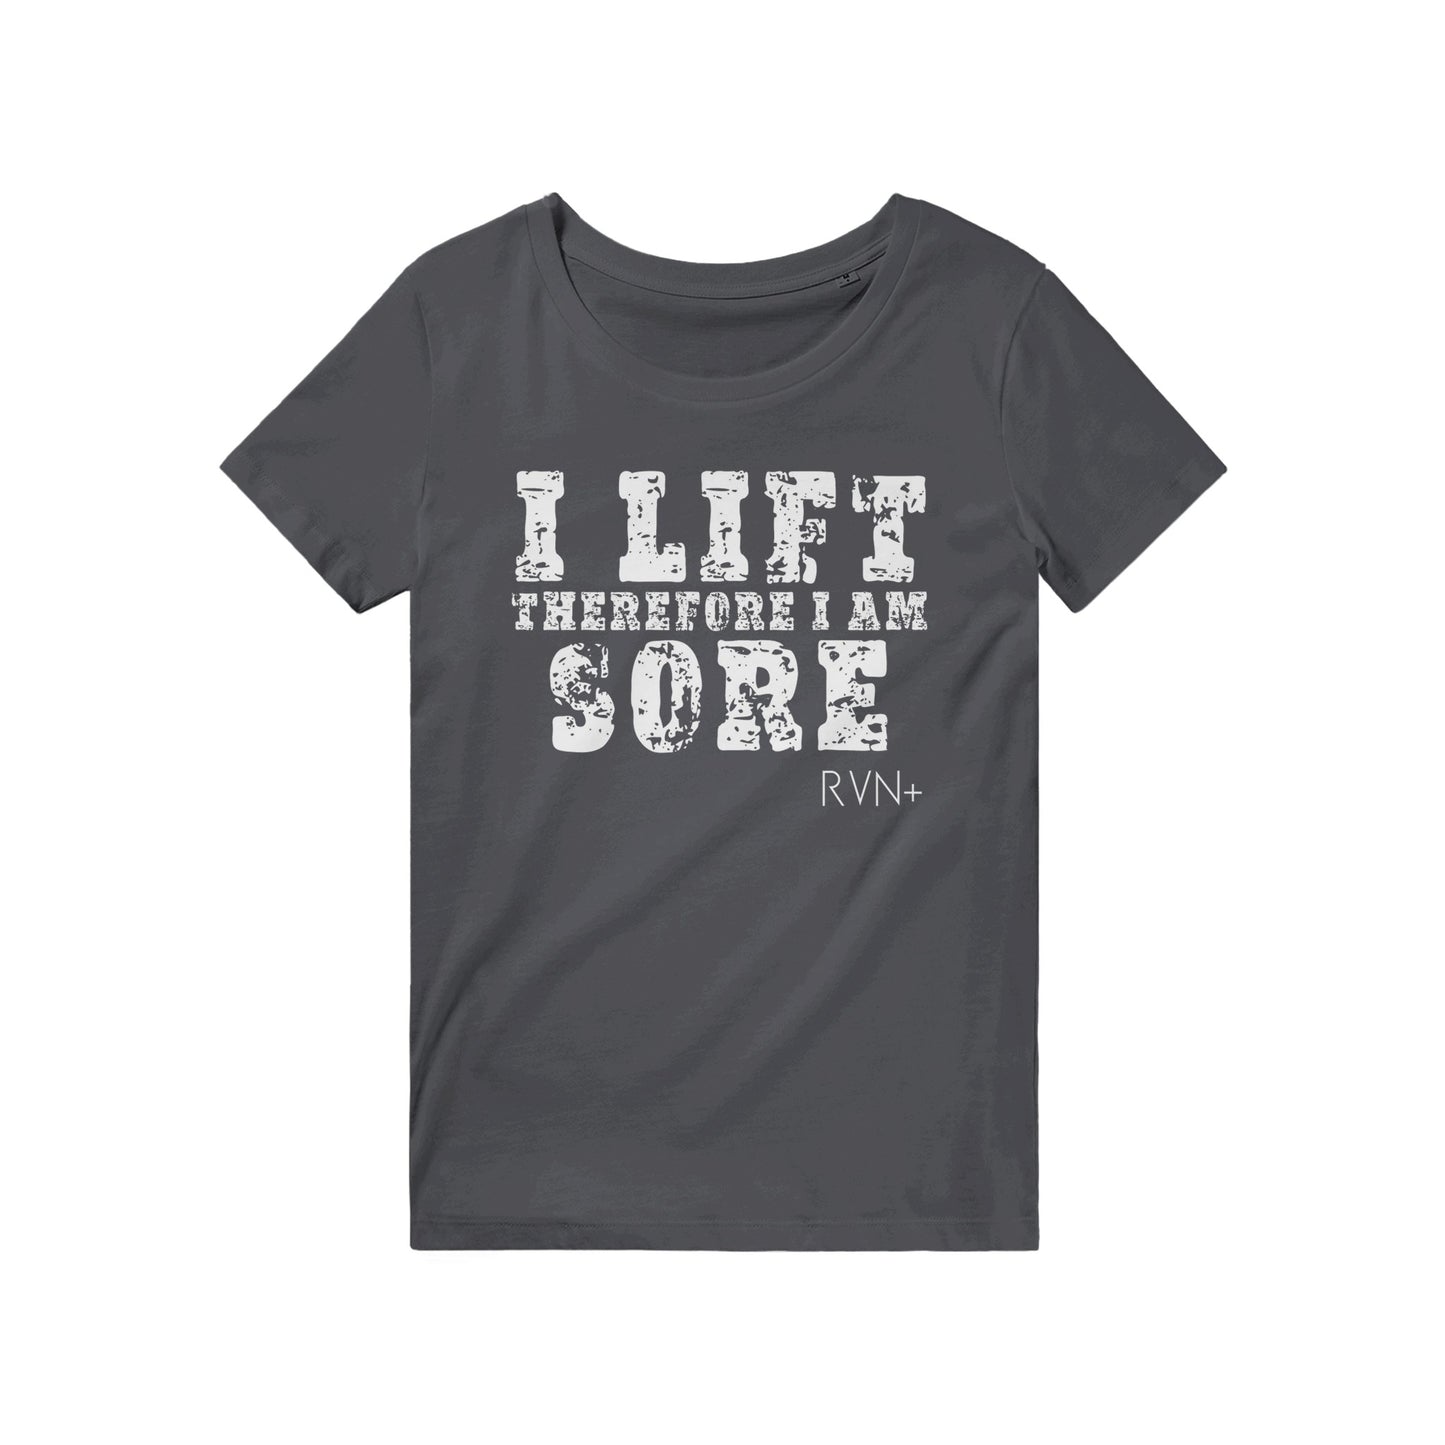 I Lift, Therefore I am Sore Unisex Organic Funny T-Shirt Clothes by Tobey Alexander